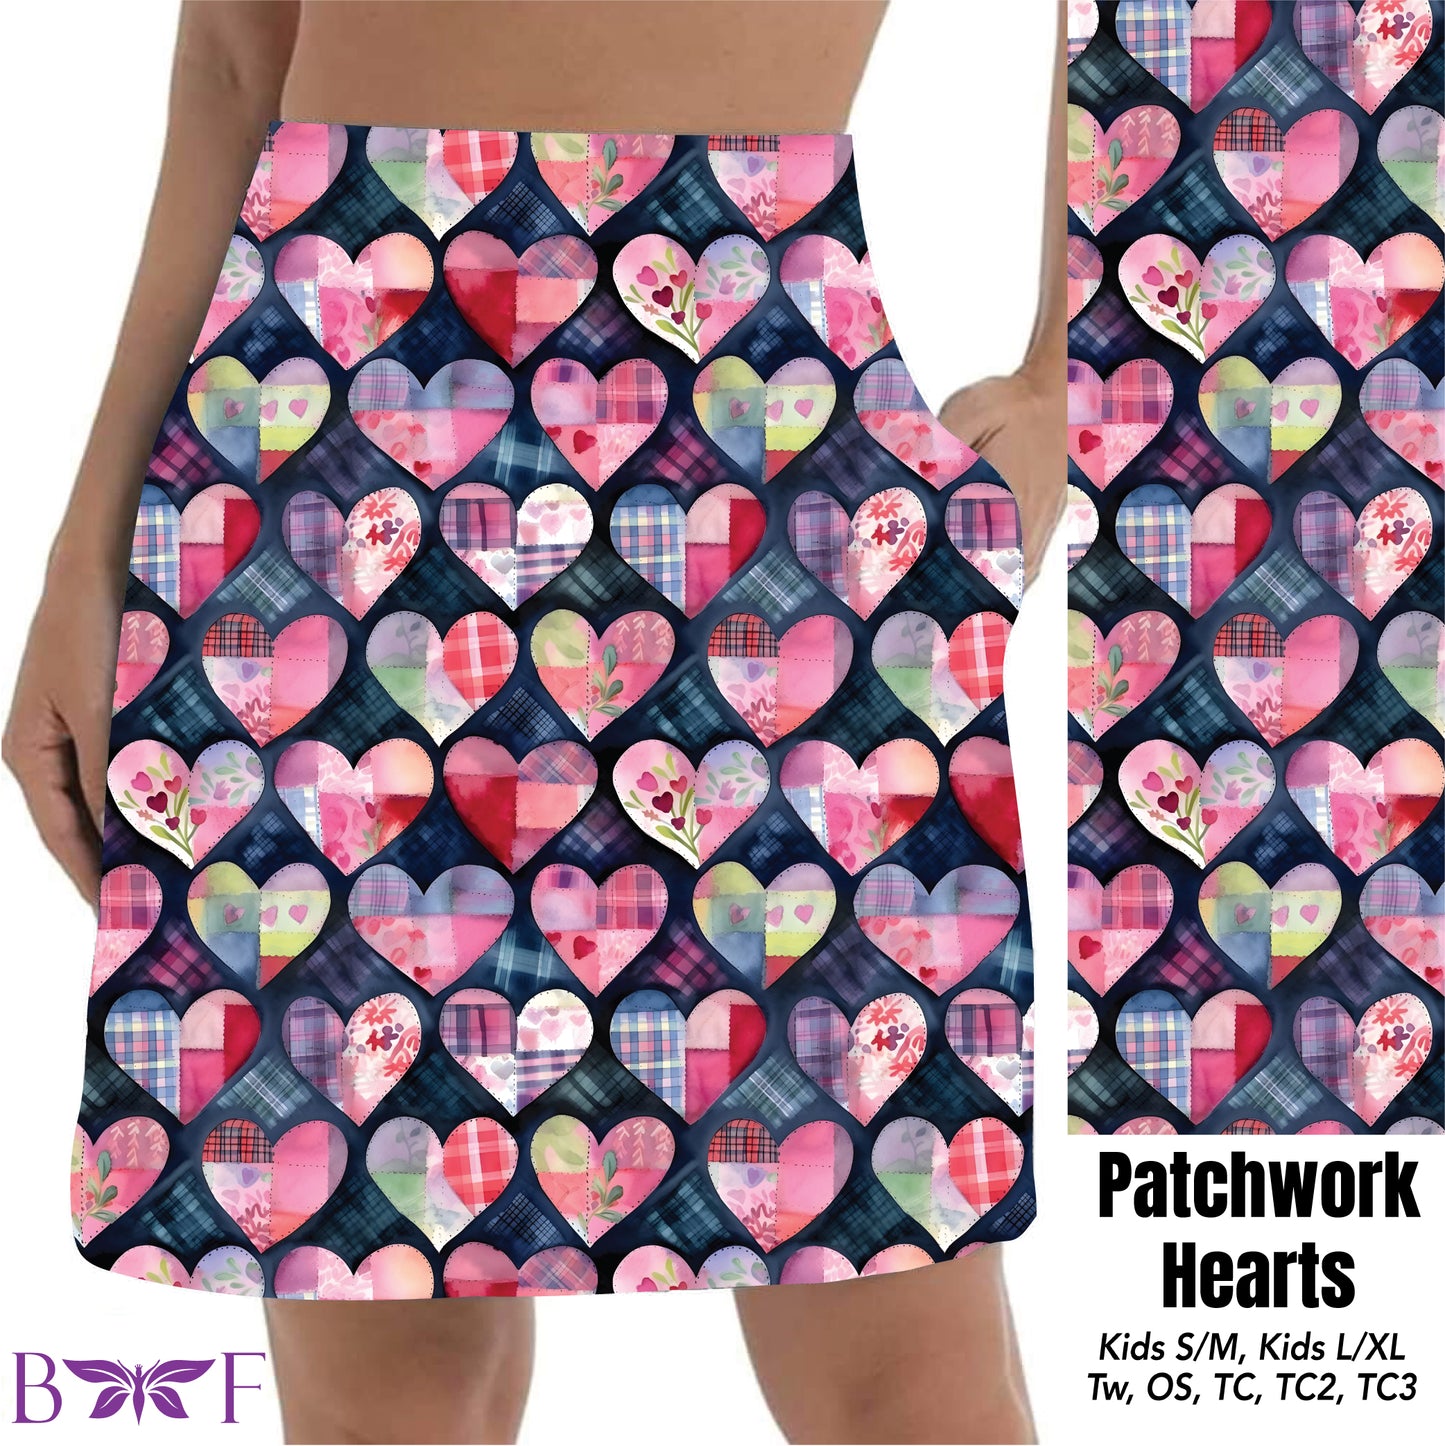 Patchwork hearts leggings and capris with pockets